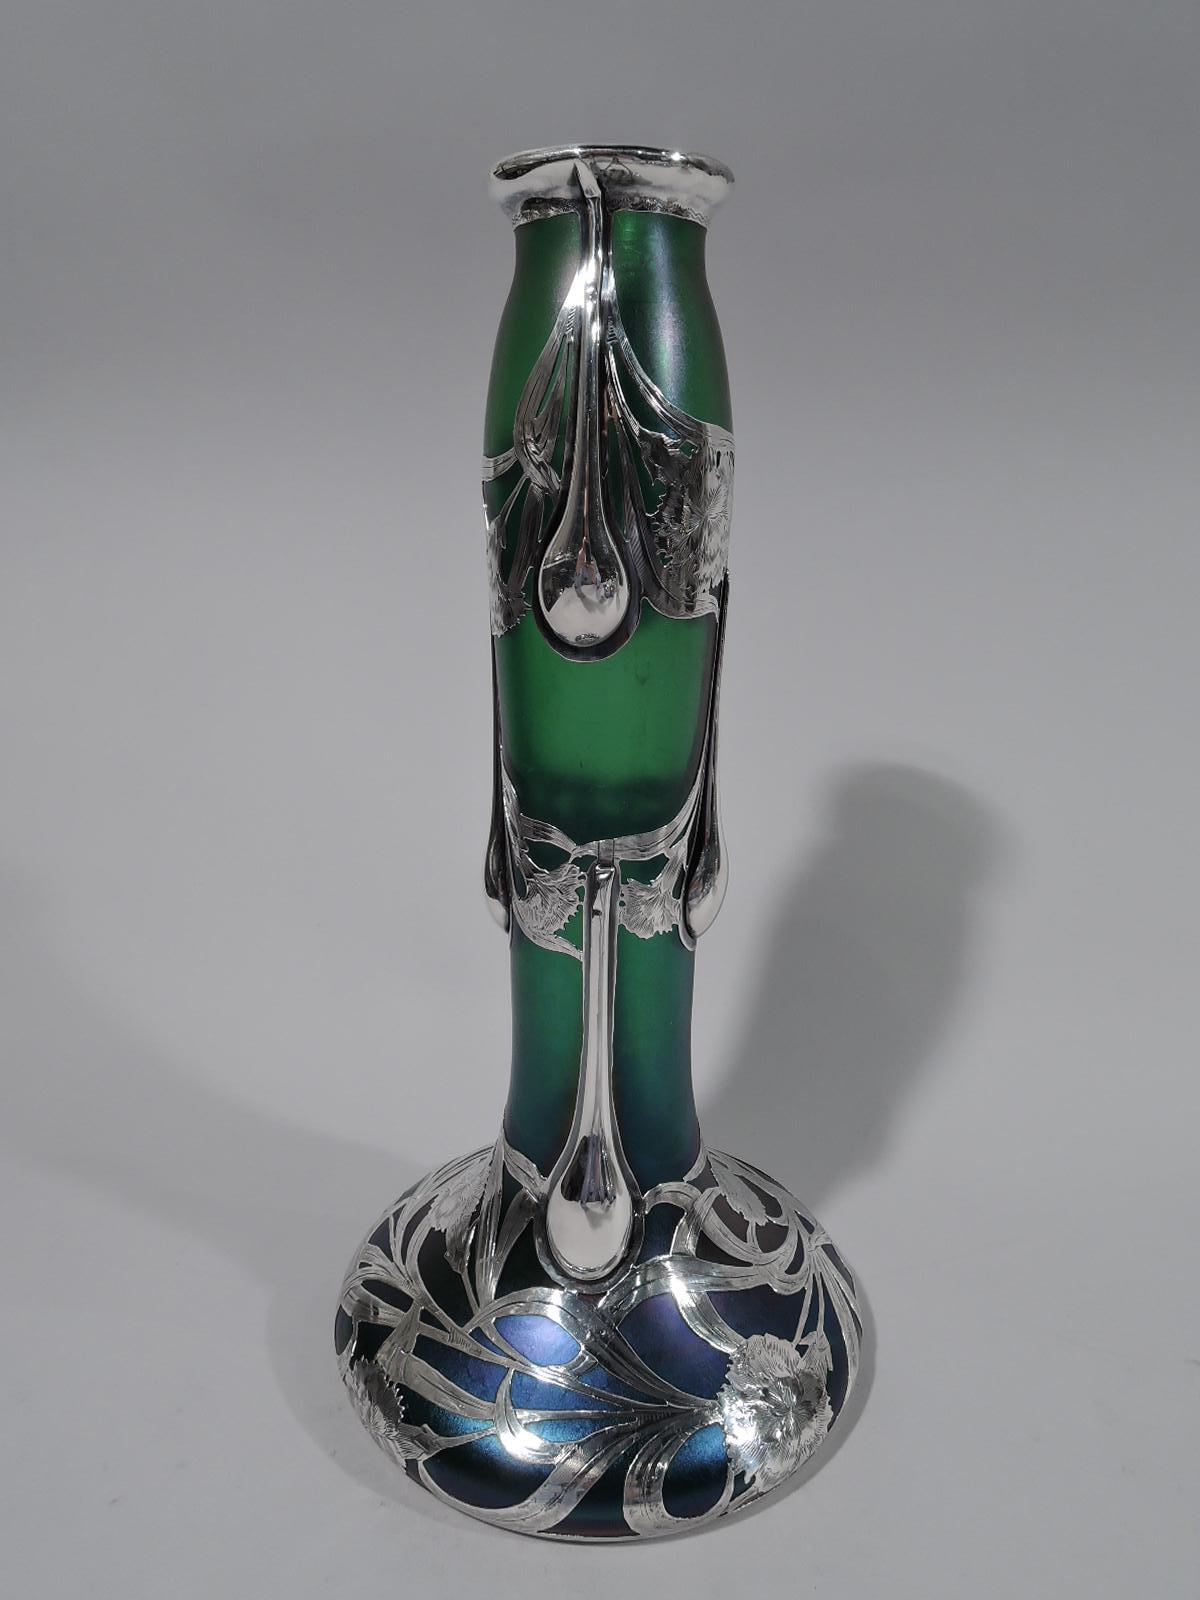 Beautiful Art Nouveau iridescent green glass vase by historic Loetz. Unusual form with tall cylindrical neck and bellied base. Engraved overlay in form of loose and entwined tendrils with flowerheads. Substantial teardrop drips on neck. Pontil mark.